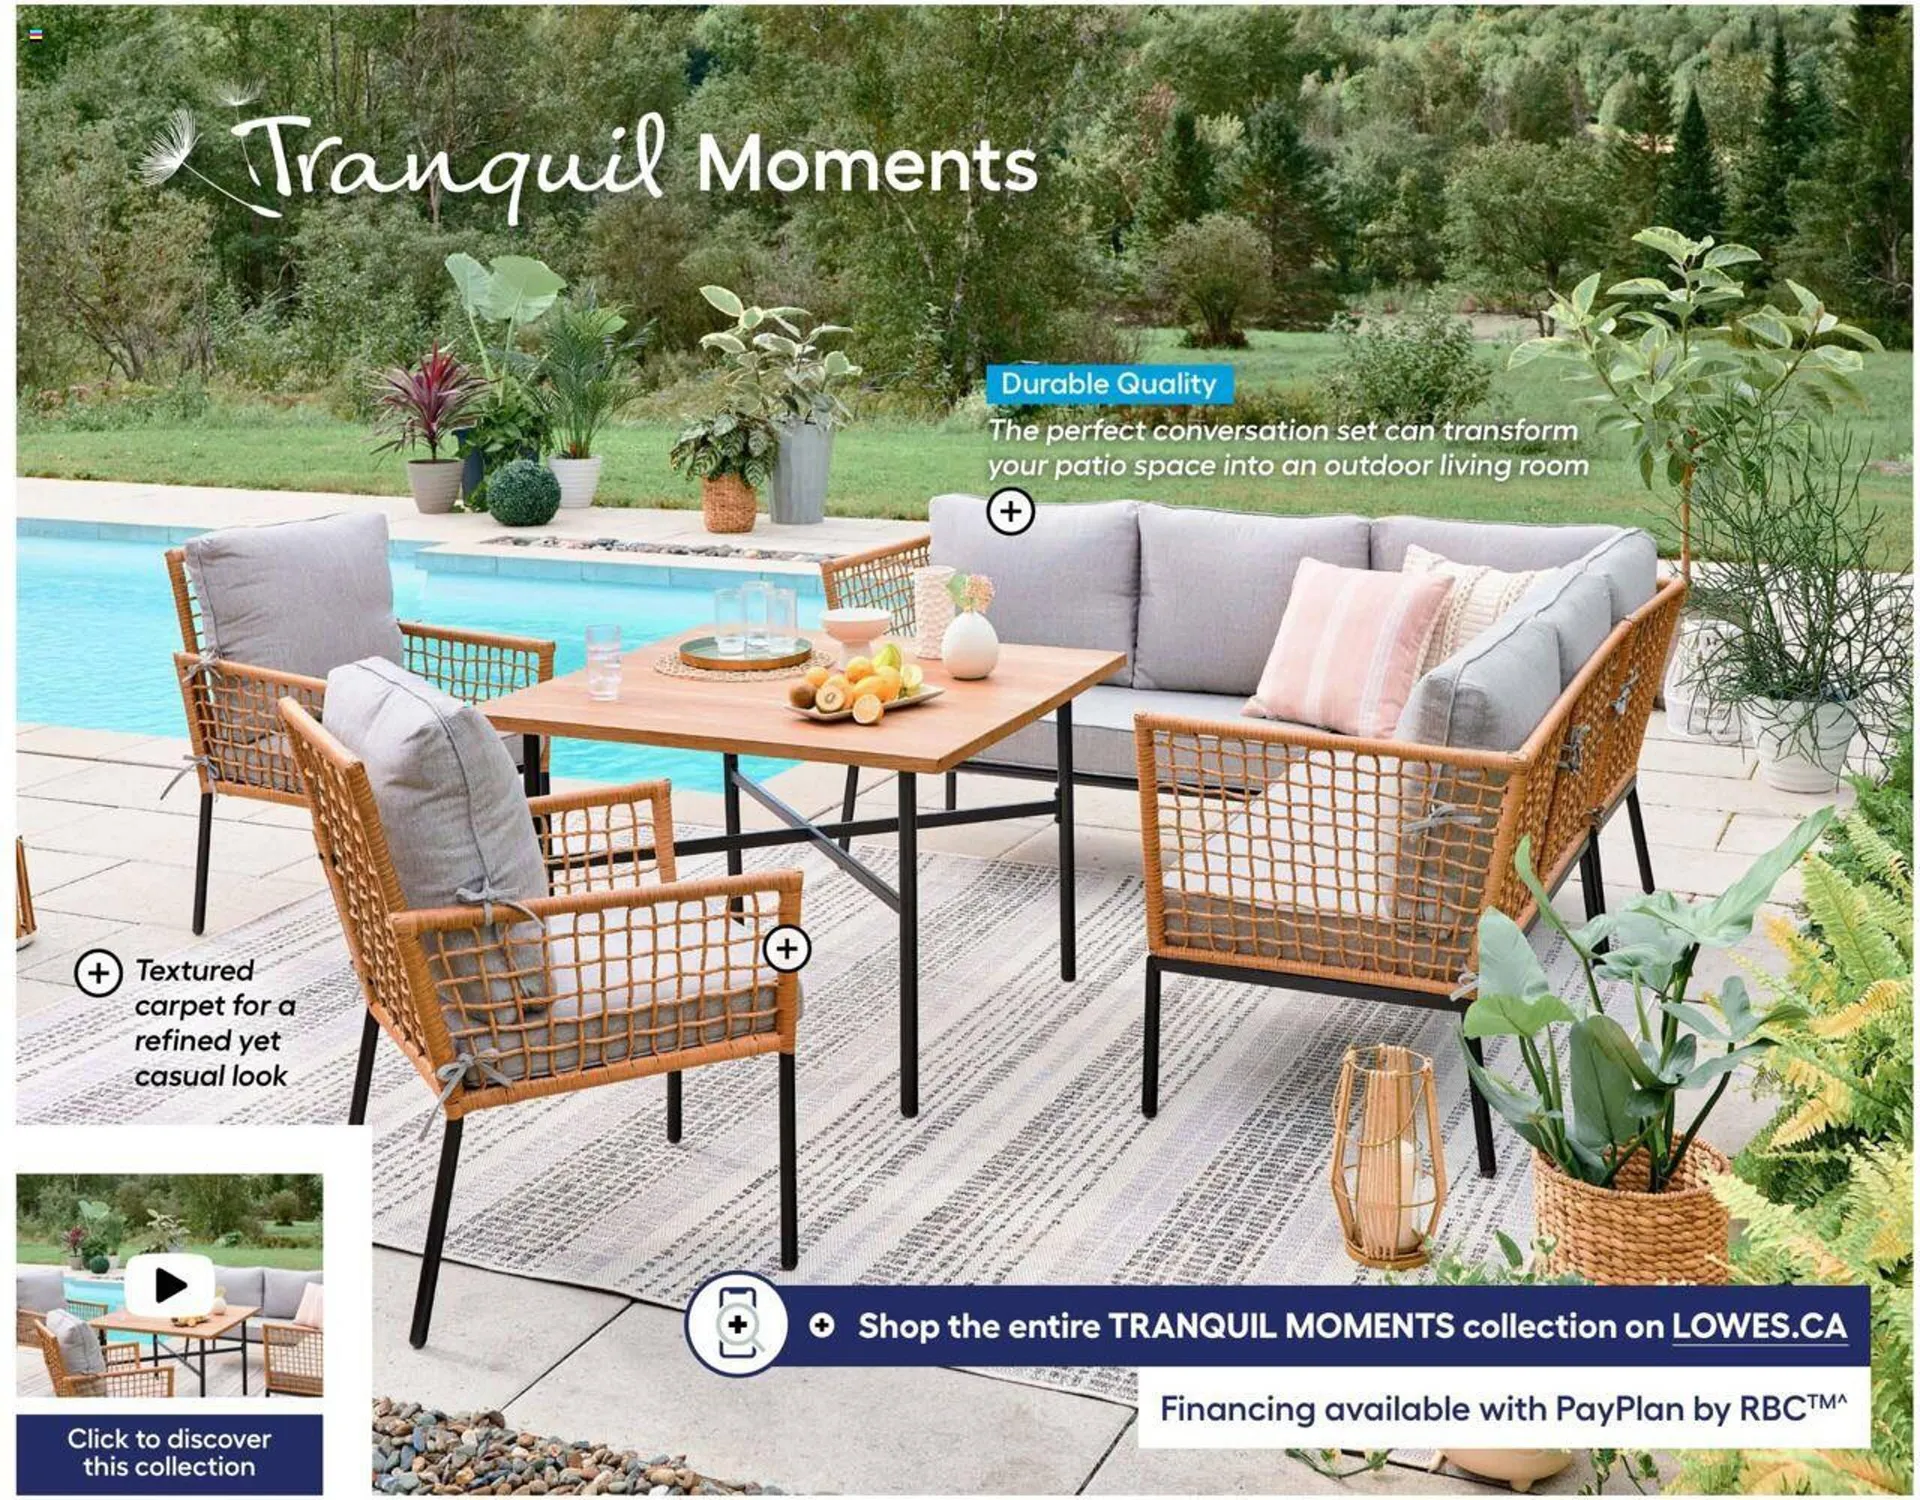 Lowes flyer - 3